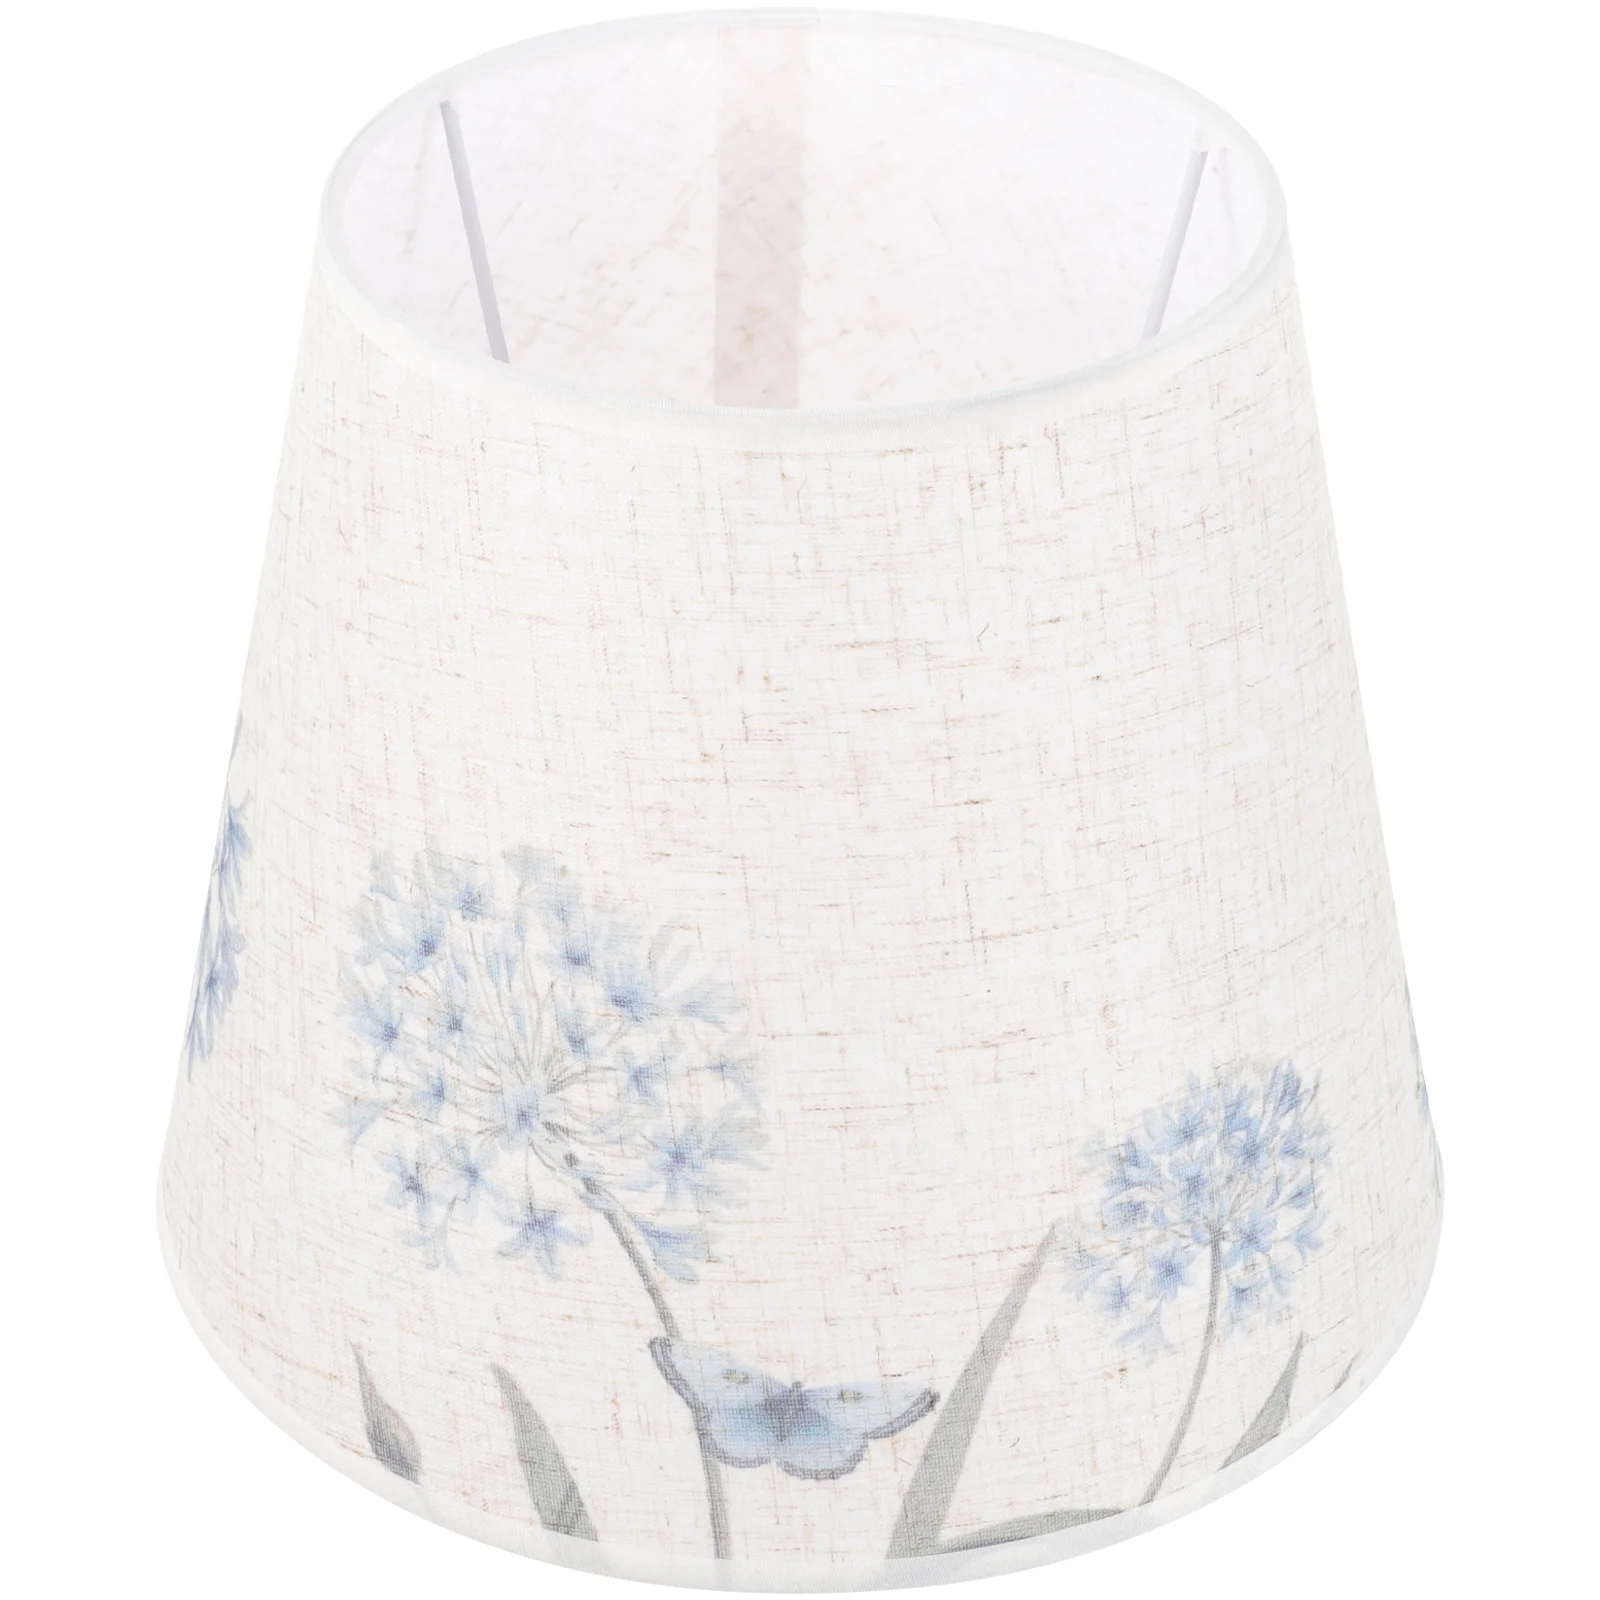 

Light Fitting Desktop Lamp Shade Wrinkle Home Cover Farmhouse Fixtures Blue Lampshade Fabric Floor Shades Lampshades Screen